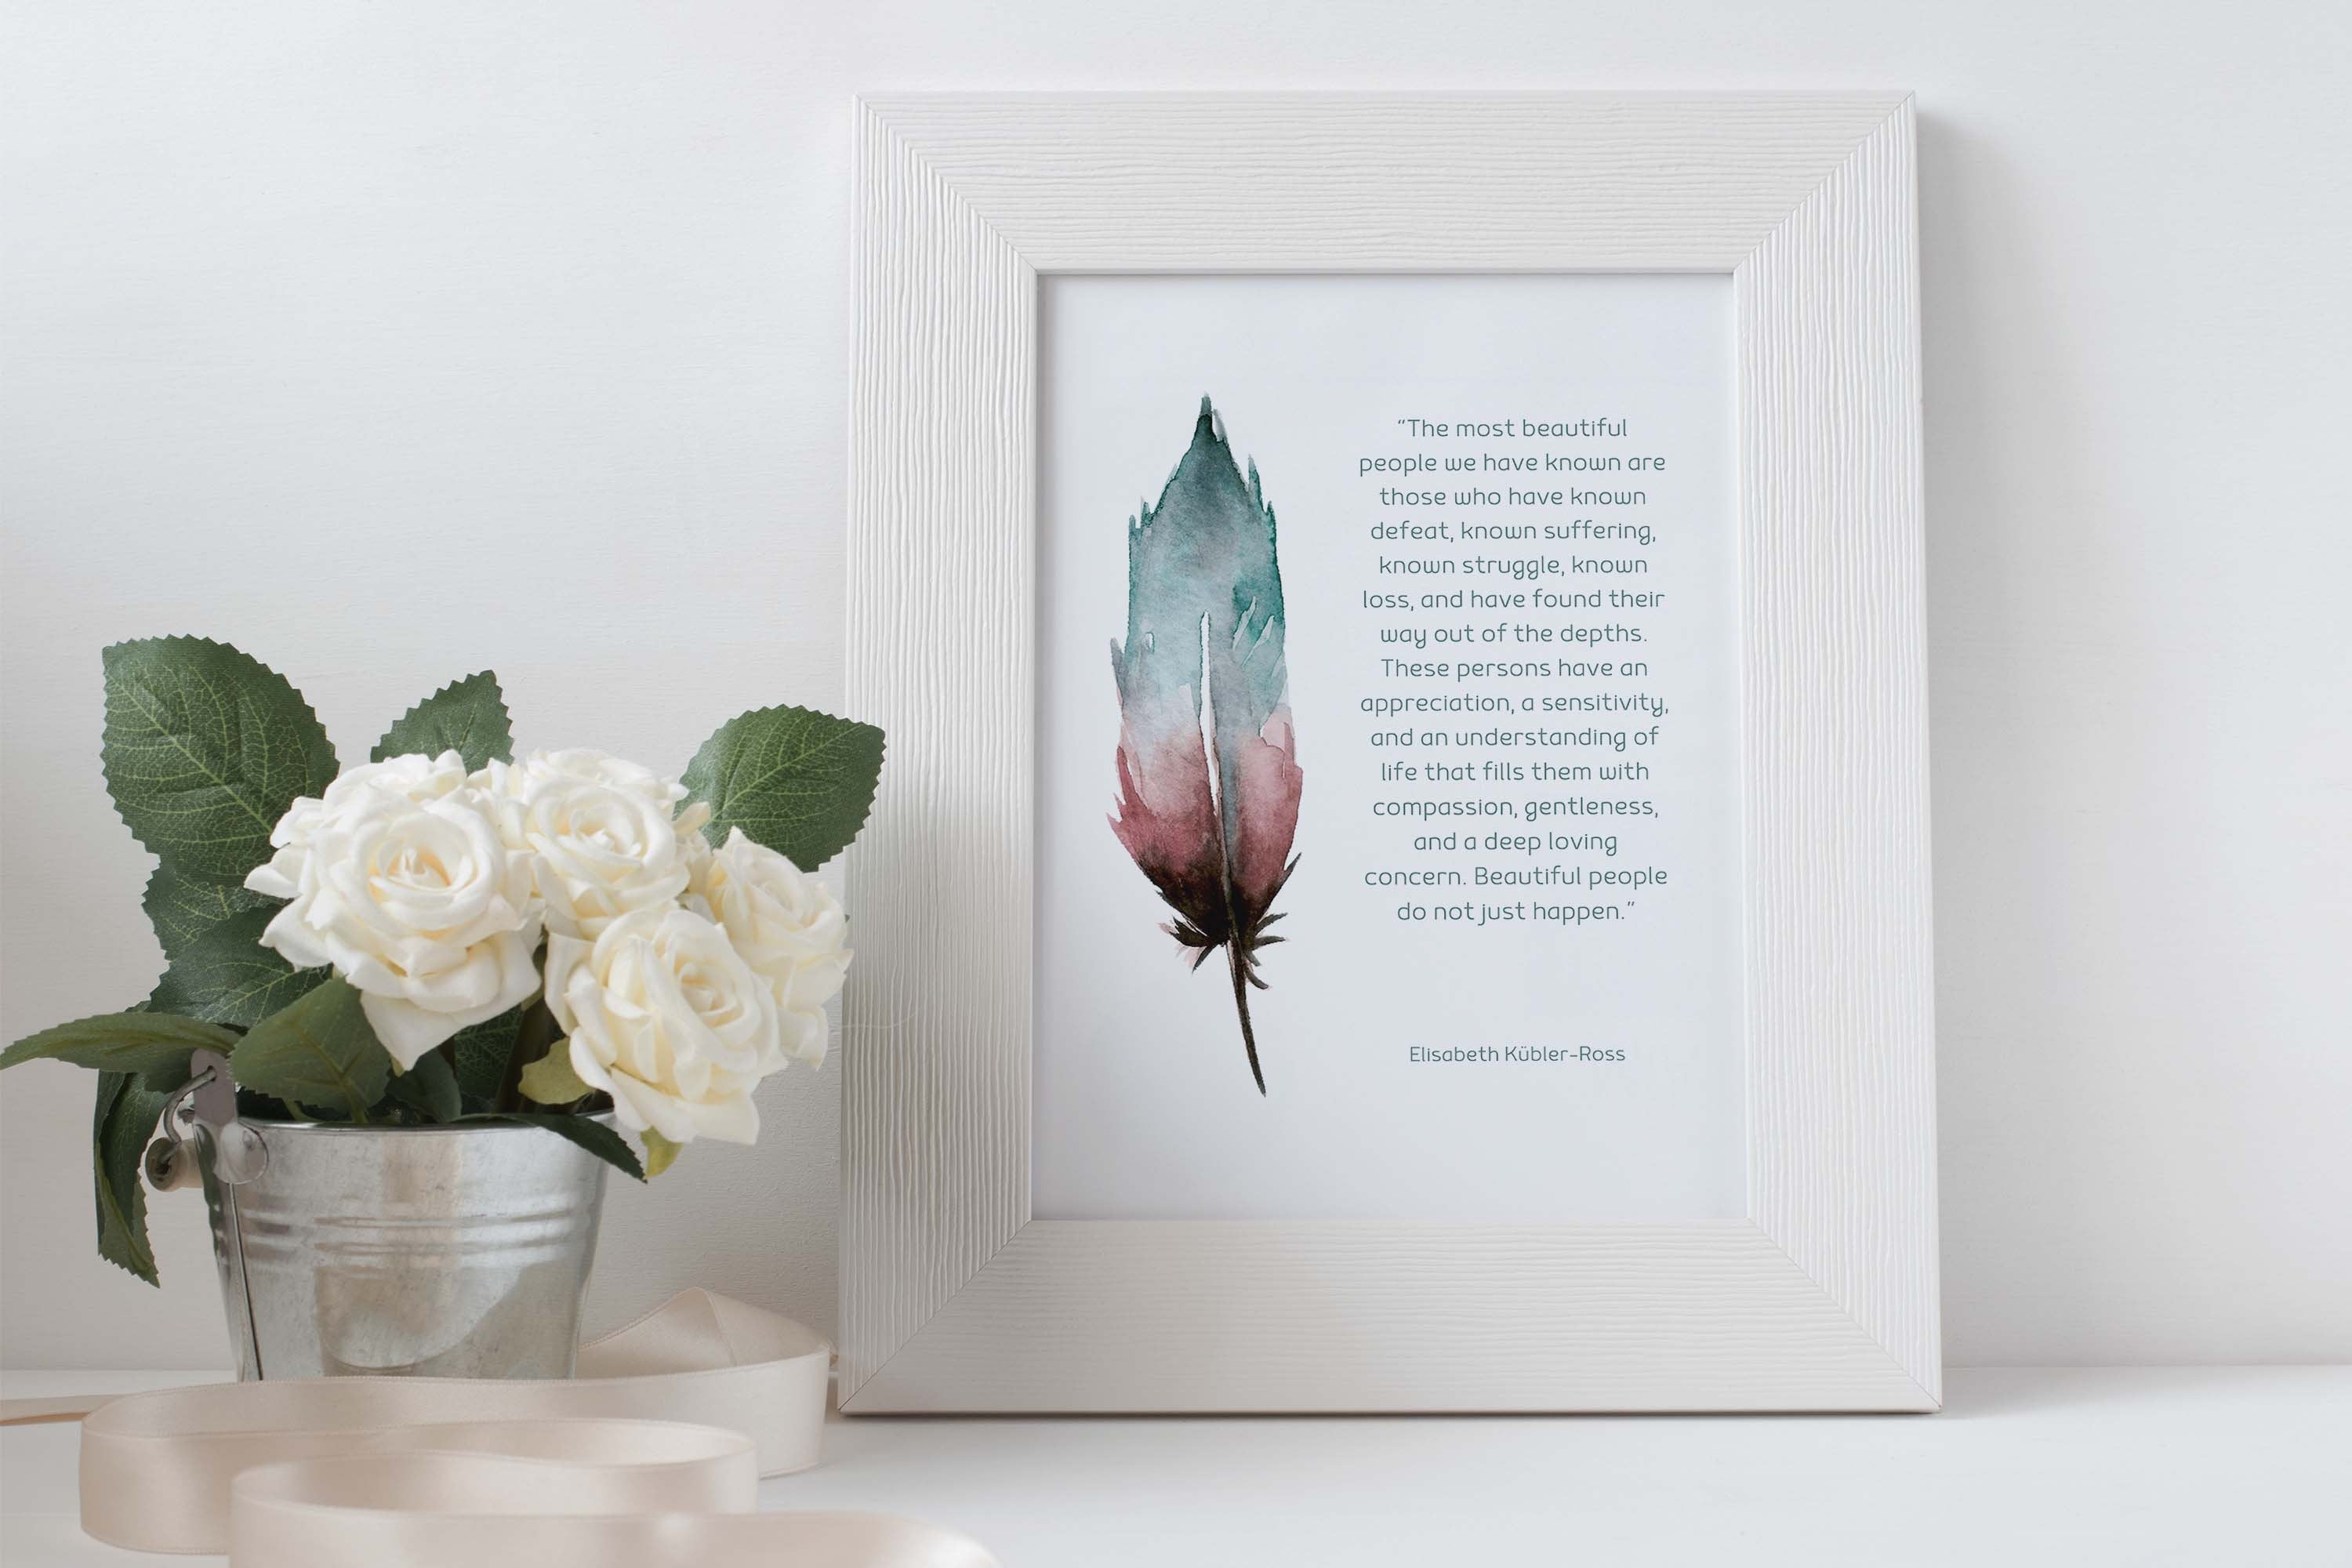 Most Beautiful People Elisabeth Kubler-Ross Quote Watercolor Wall Decor